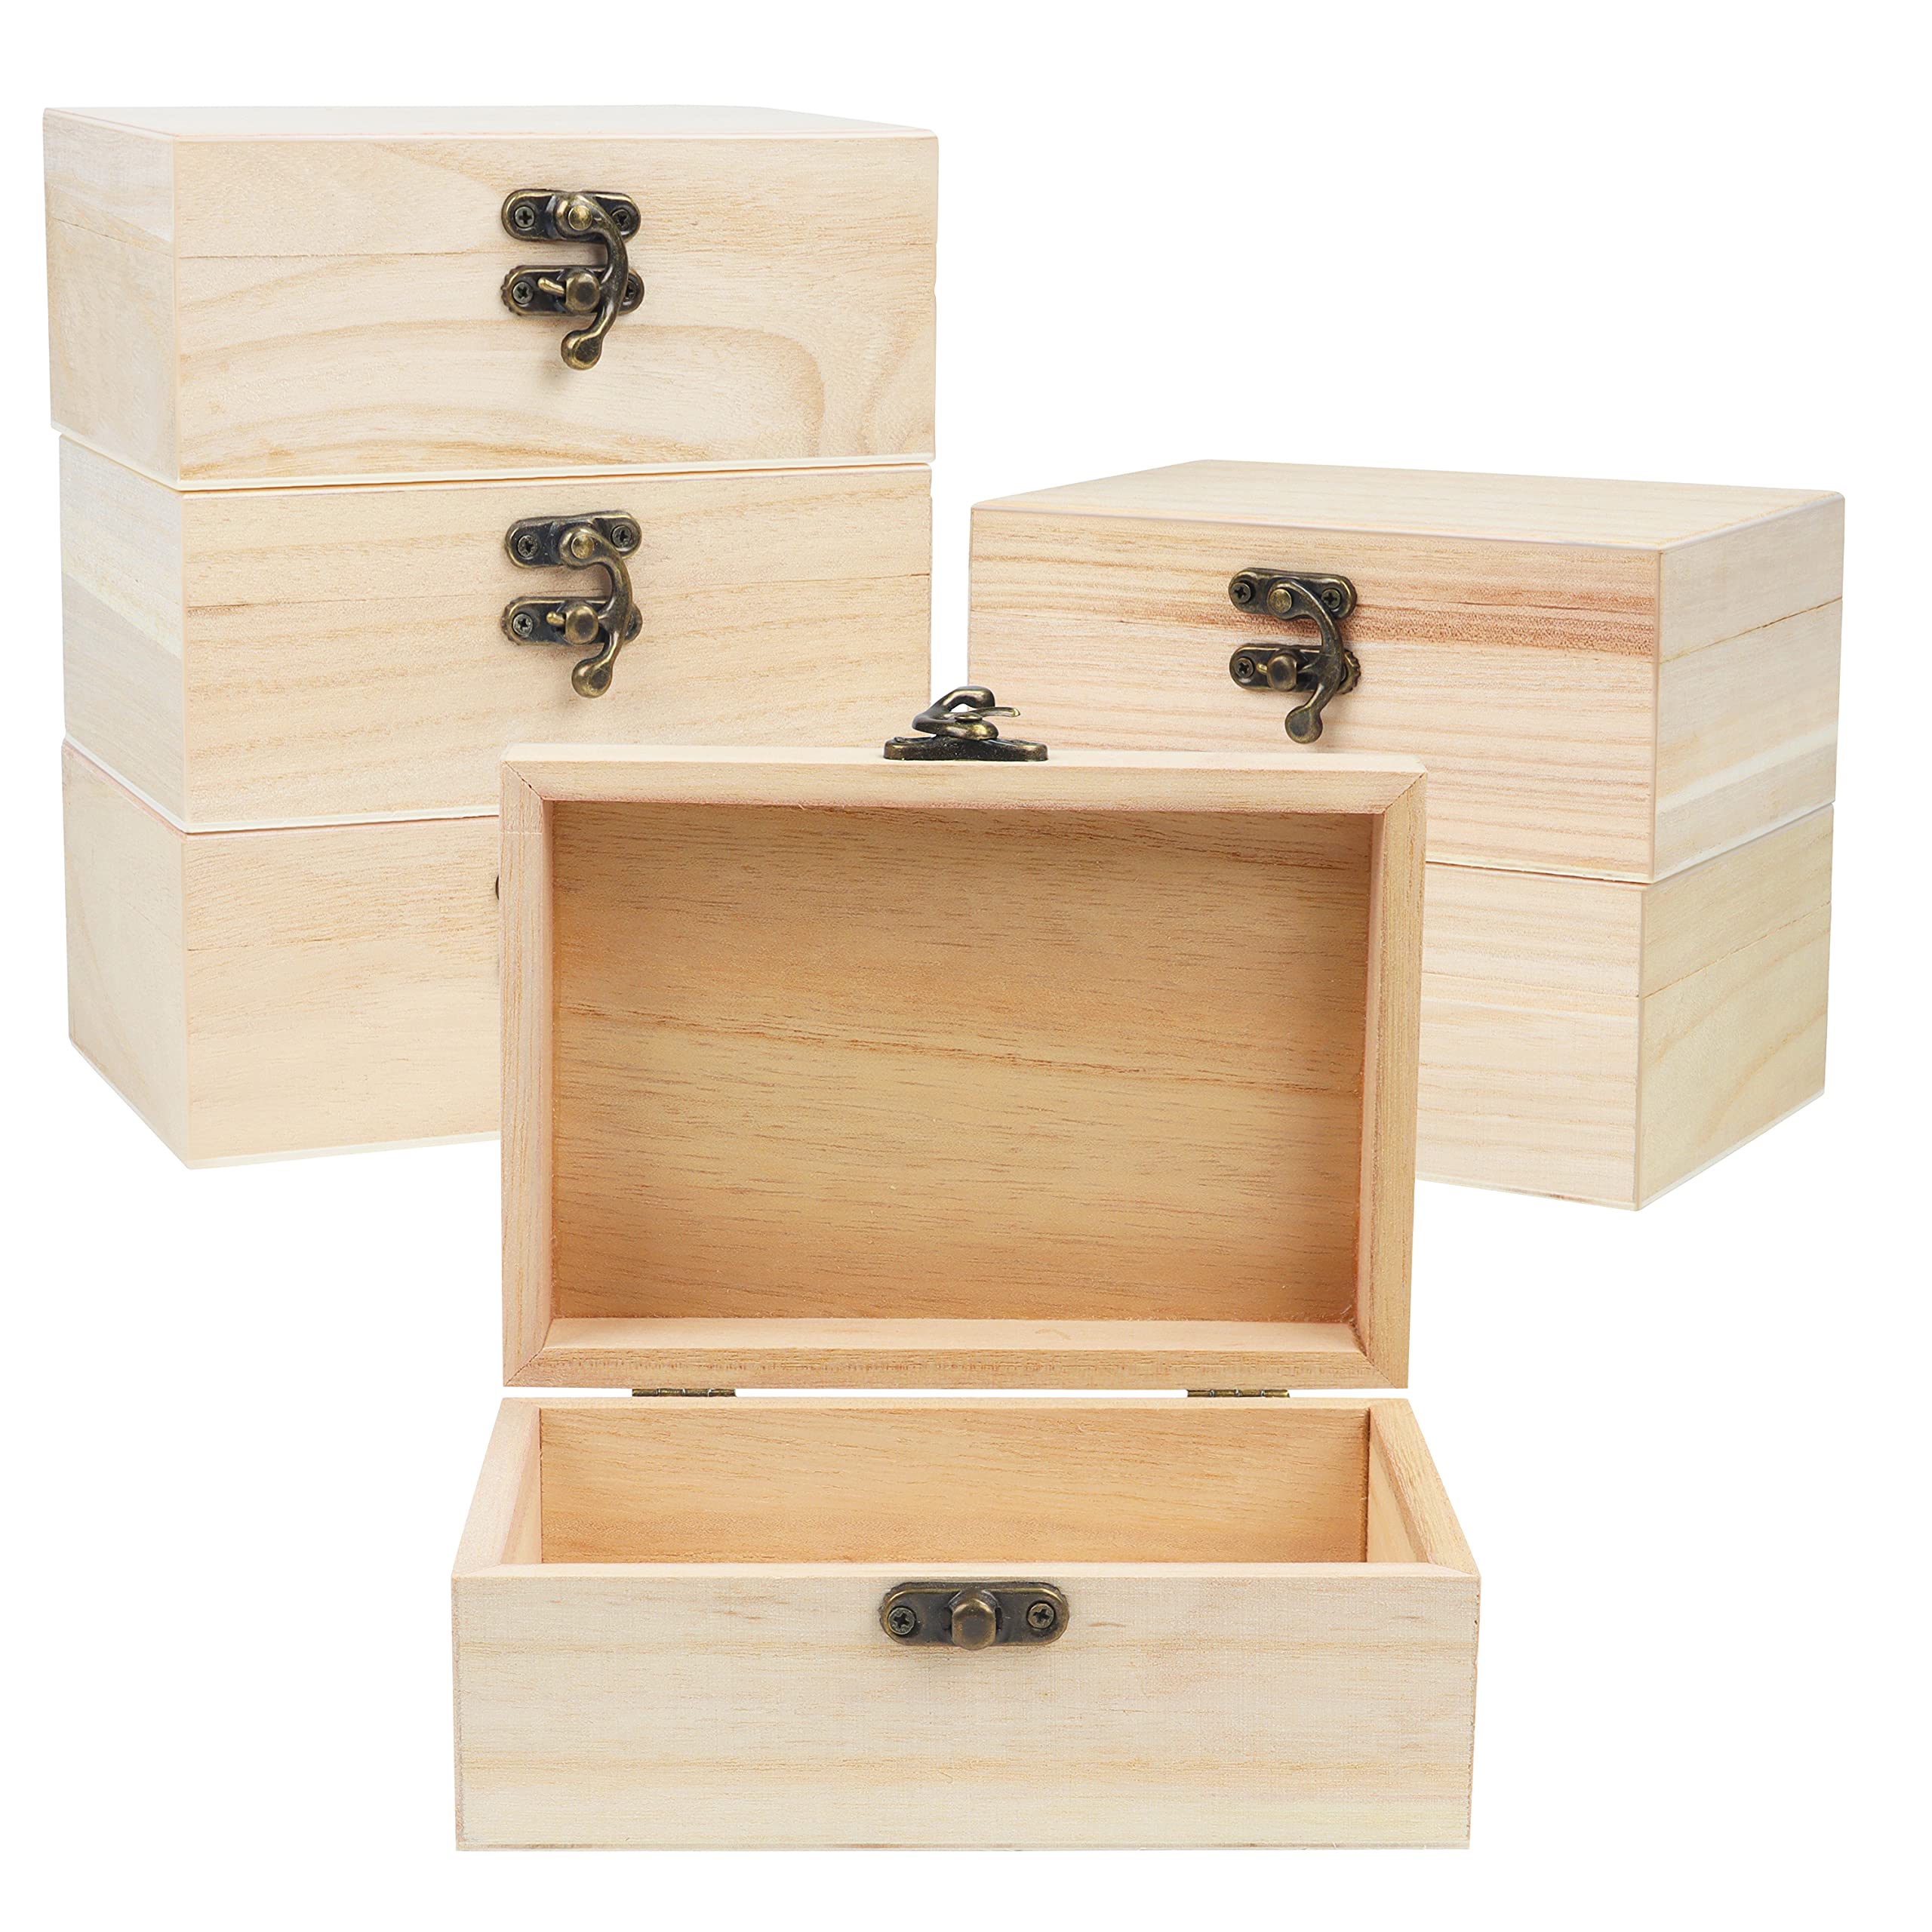 Belle Vous Unfinished Wooden Box (6 Pack) - 14.8 x 10.2 x 6.3cm / 5.83 x 4.02 x 2.48 Inches - Wood Boxes with Hinged Lid & Front Locking Clasp - Home Storage for Jewellery, DIY Arts & Crafts Hobbies